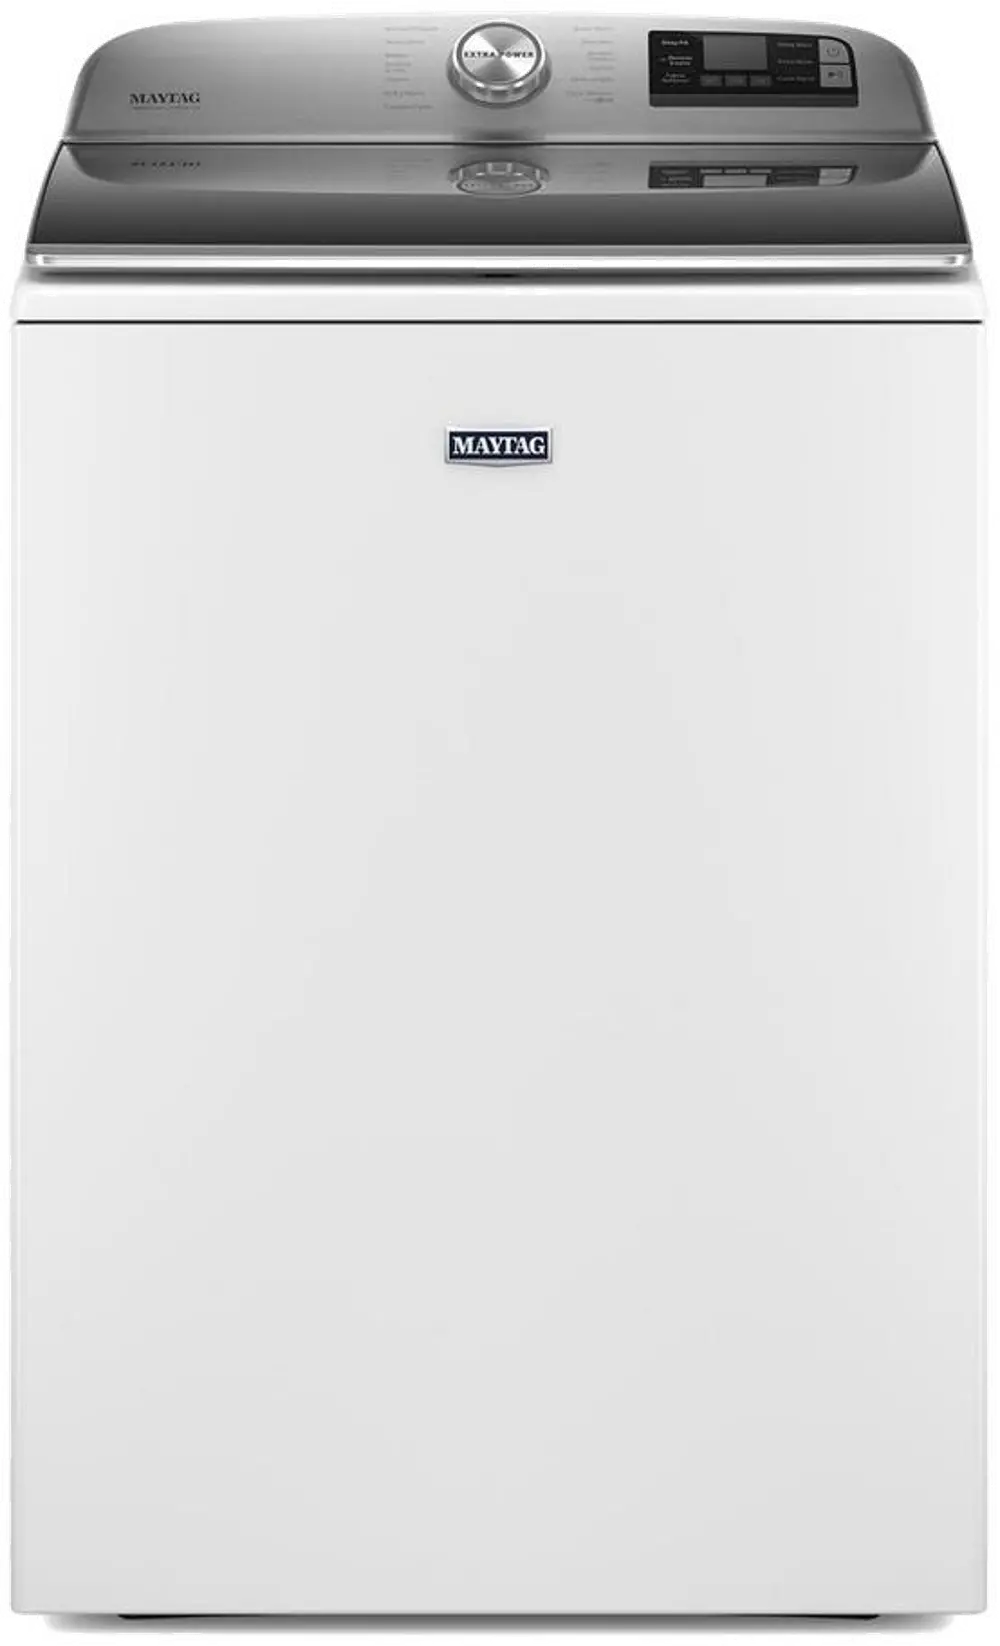 MVW7232HW Maytag Smart Top Load Washer with Extra Power Button - 5.3 Cu. Ft. White-1